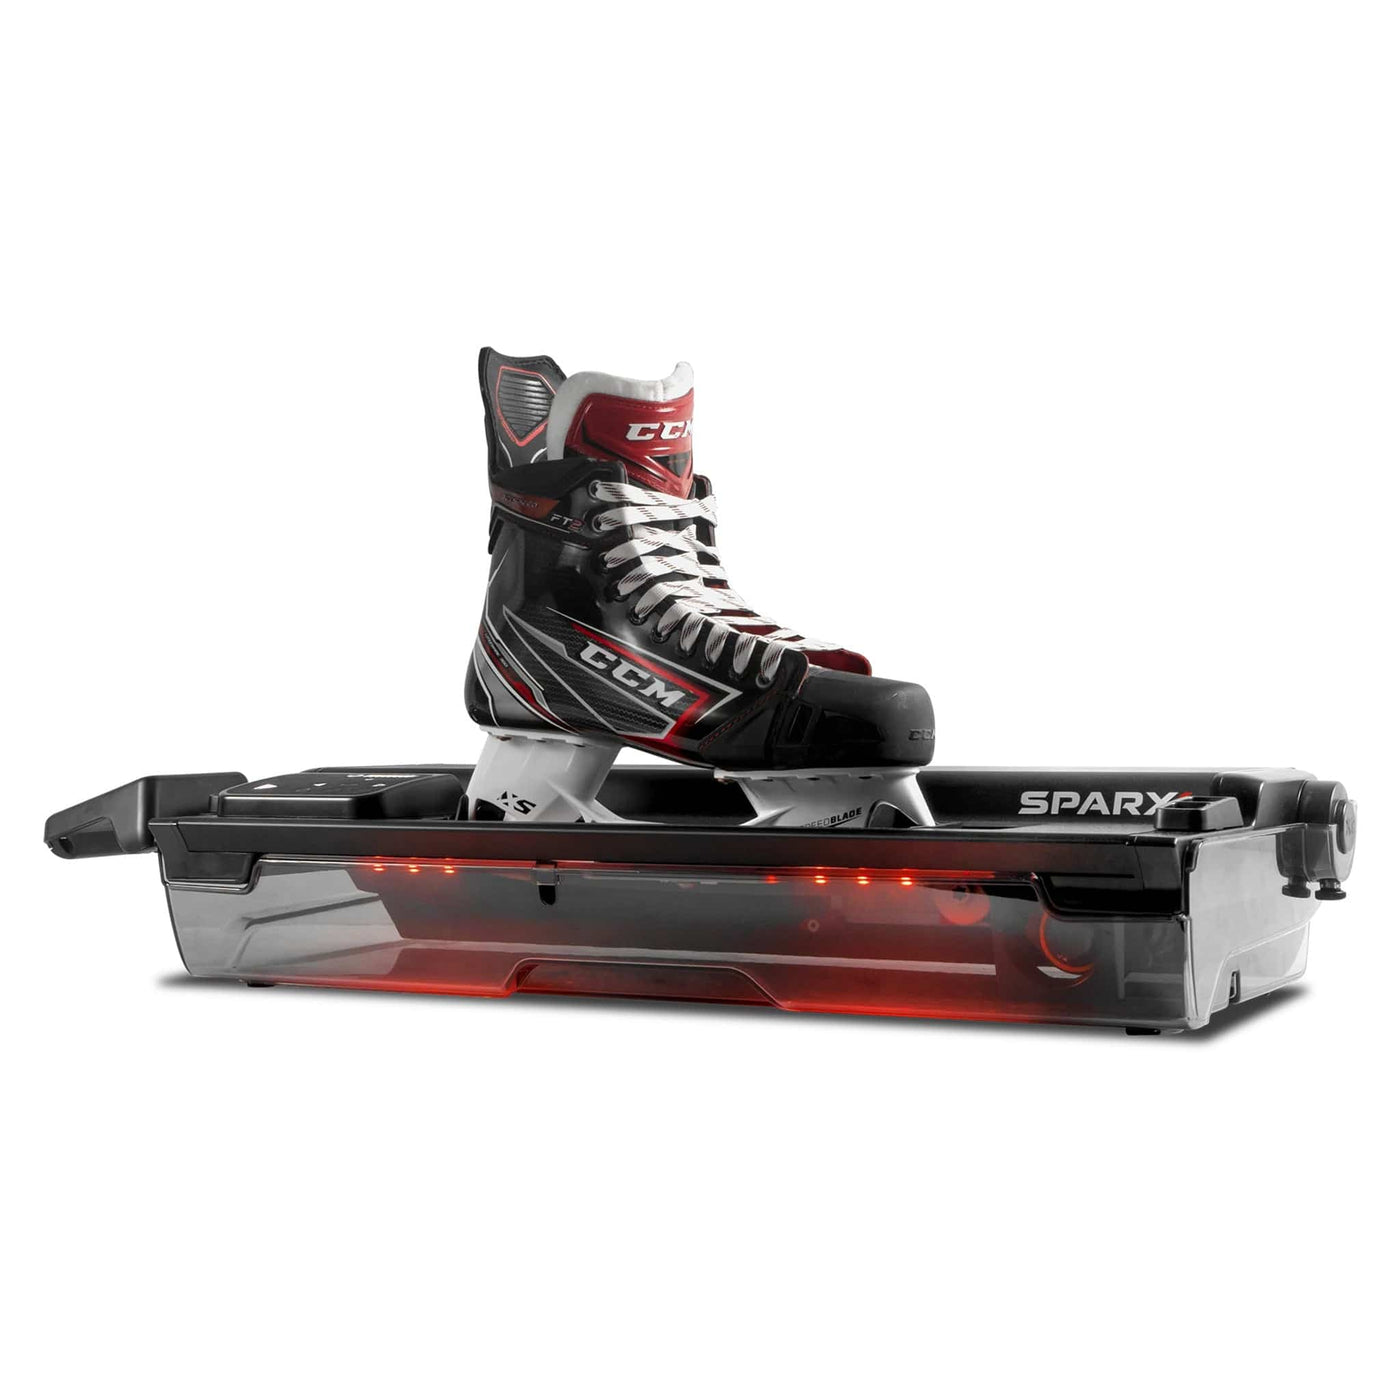 Sparx Sharpening Machine - The Hockey Shop Source For Sports